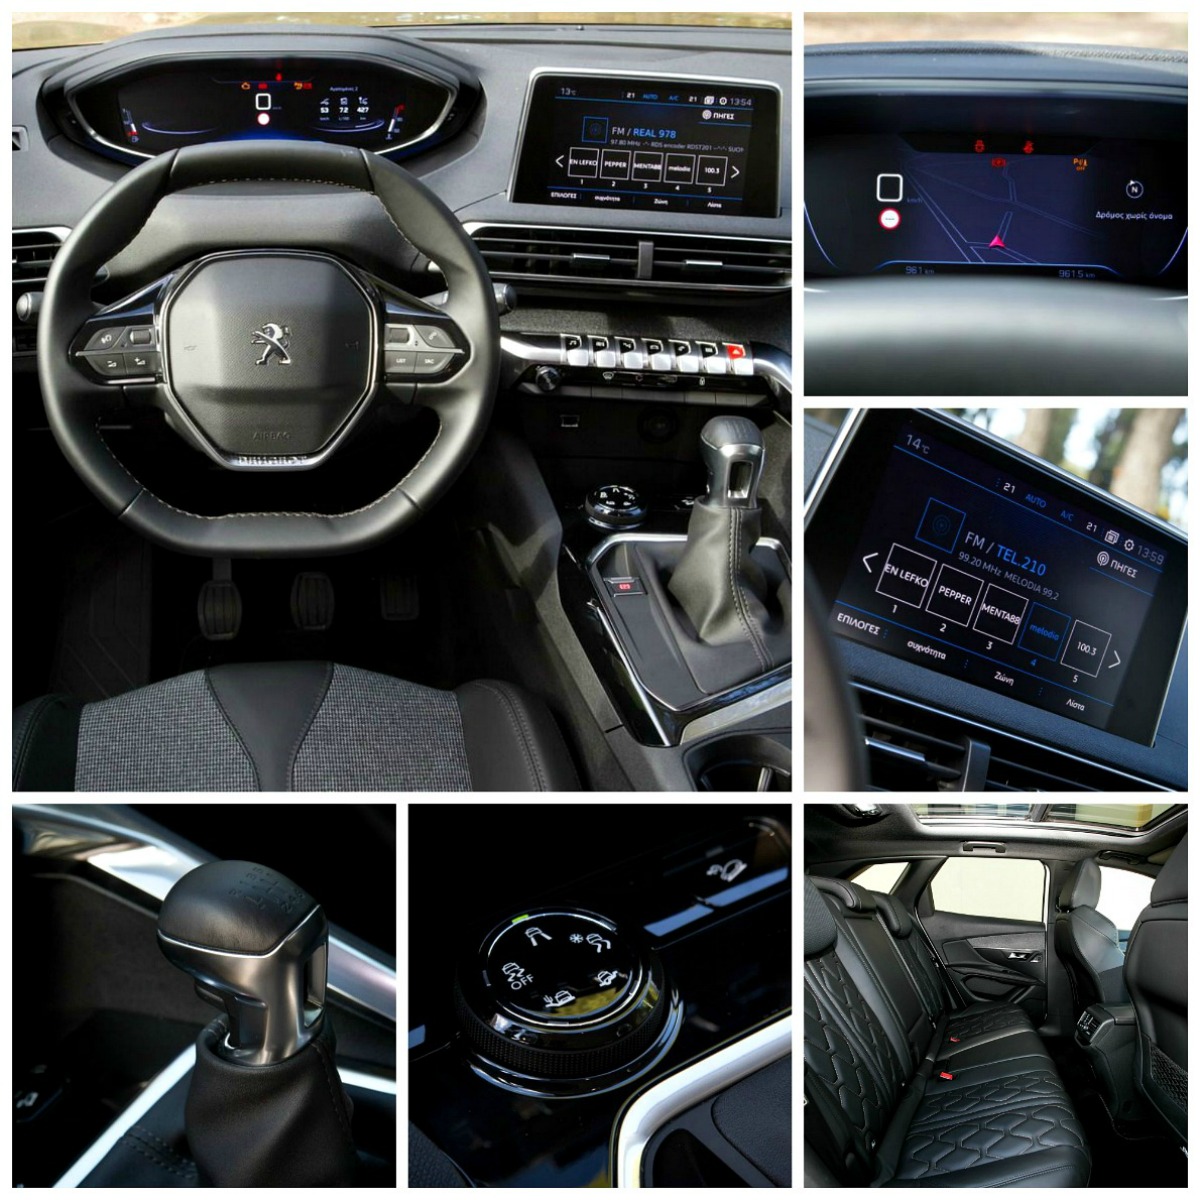 Peugeot 3008 collage